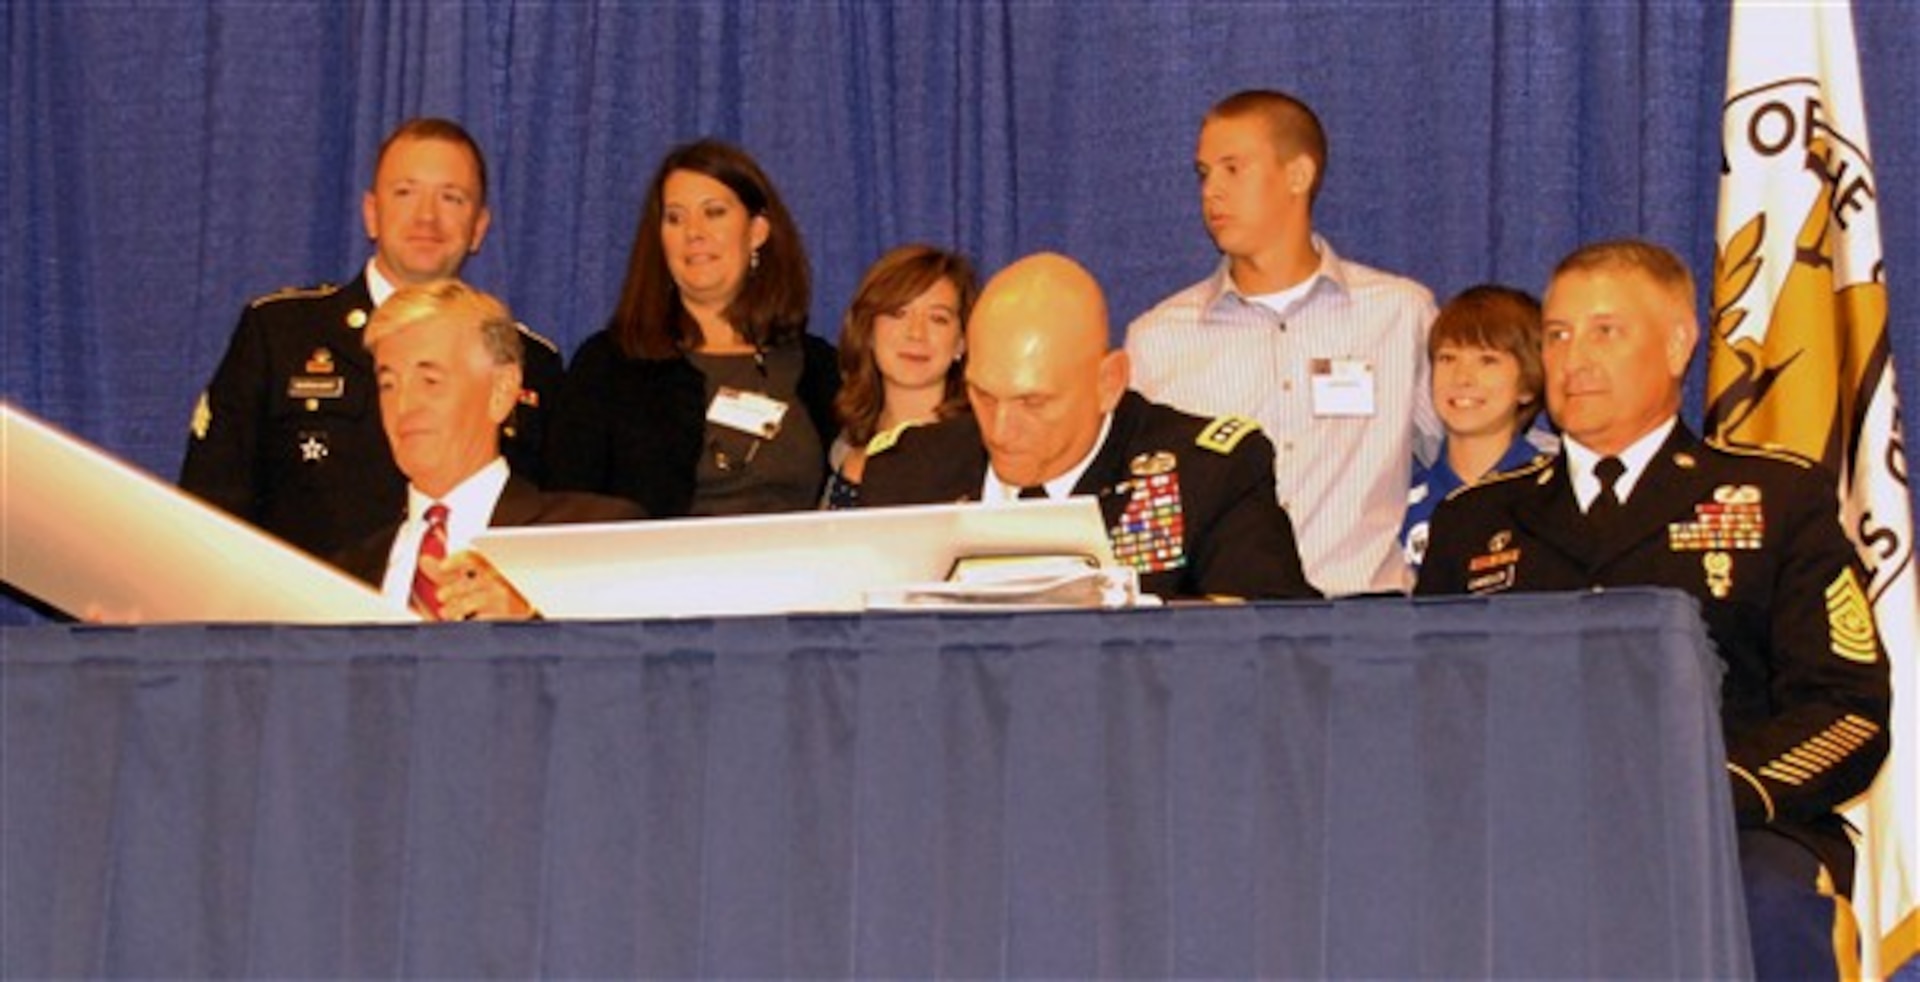 Army Secretary John M. McHugh, Army Chief of Staff Gen. Raymond T. Odierno and Sgt. Maj. of the Army Raymond F. Chandler III, sign the Army Family Covenant, Oct. 10, 2011, as wounded warrior Army Sgt. Jeremy Barnhart and his family look on. The Barnhart family was honored as the Association of the U.S. Army’s volunteer family of the year.